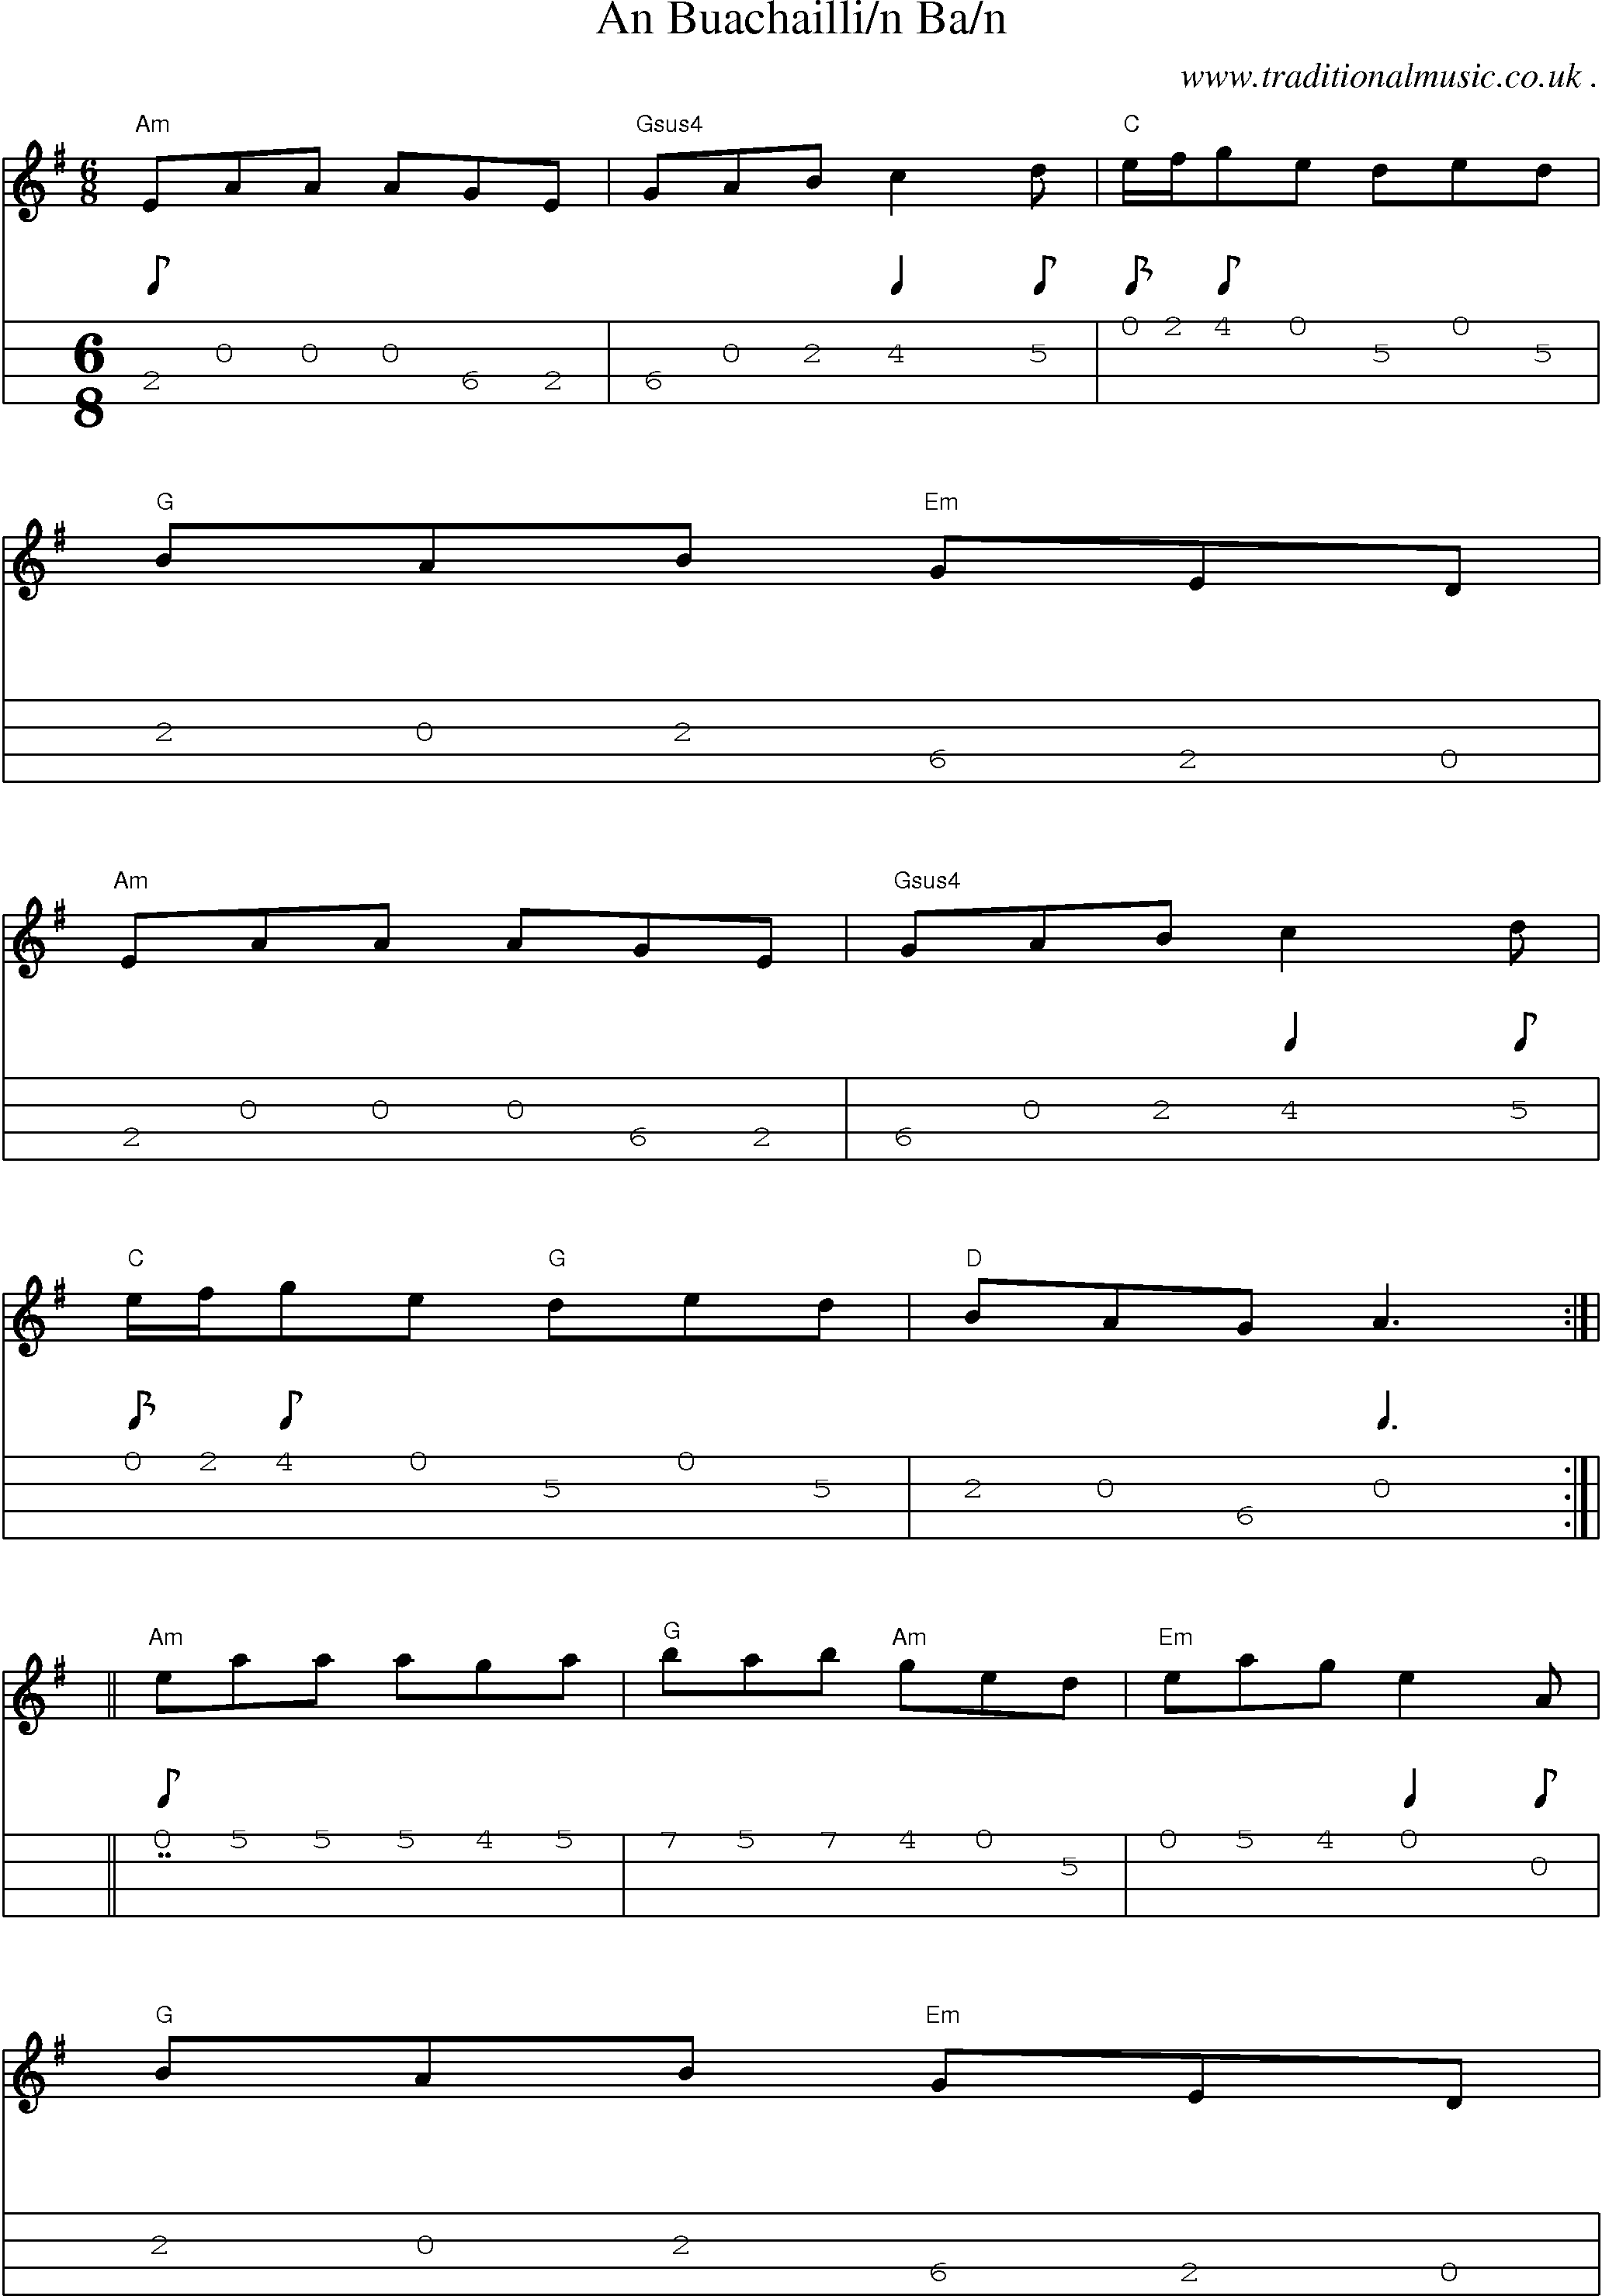 Music Score and Guitar Tabs for An Buachaillin Ban